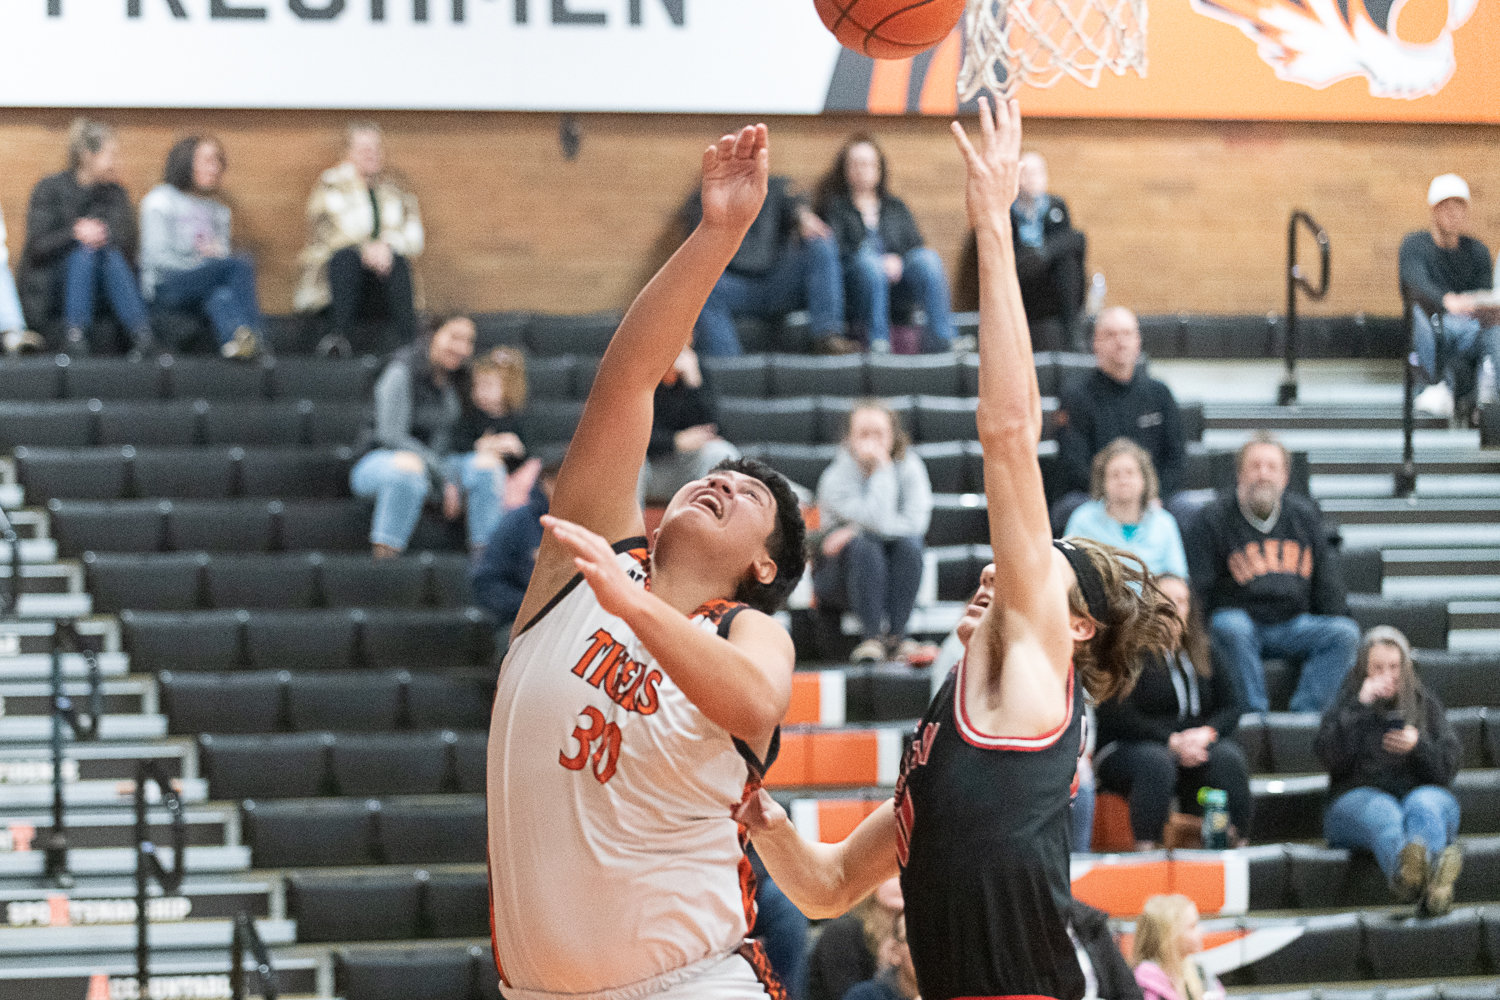 Carlos Vallejo goes up through contact in the post during Centralia's loss to Shelton on Feb. 2.